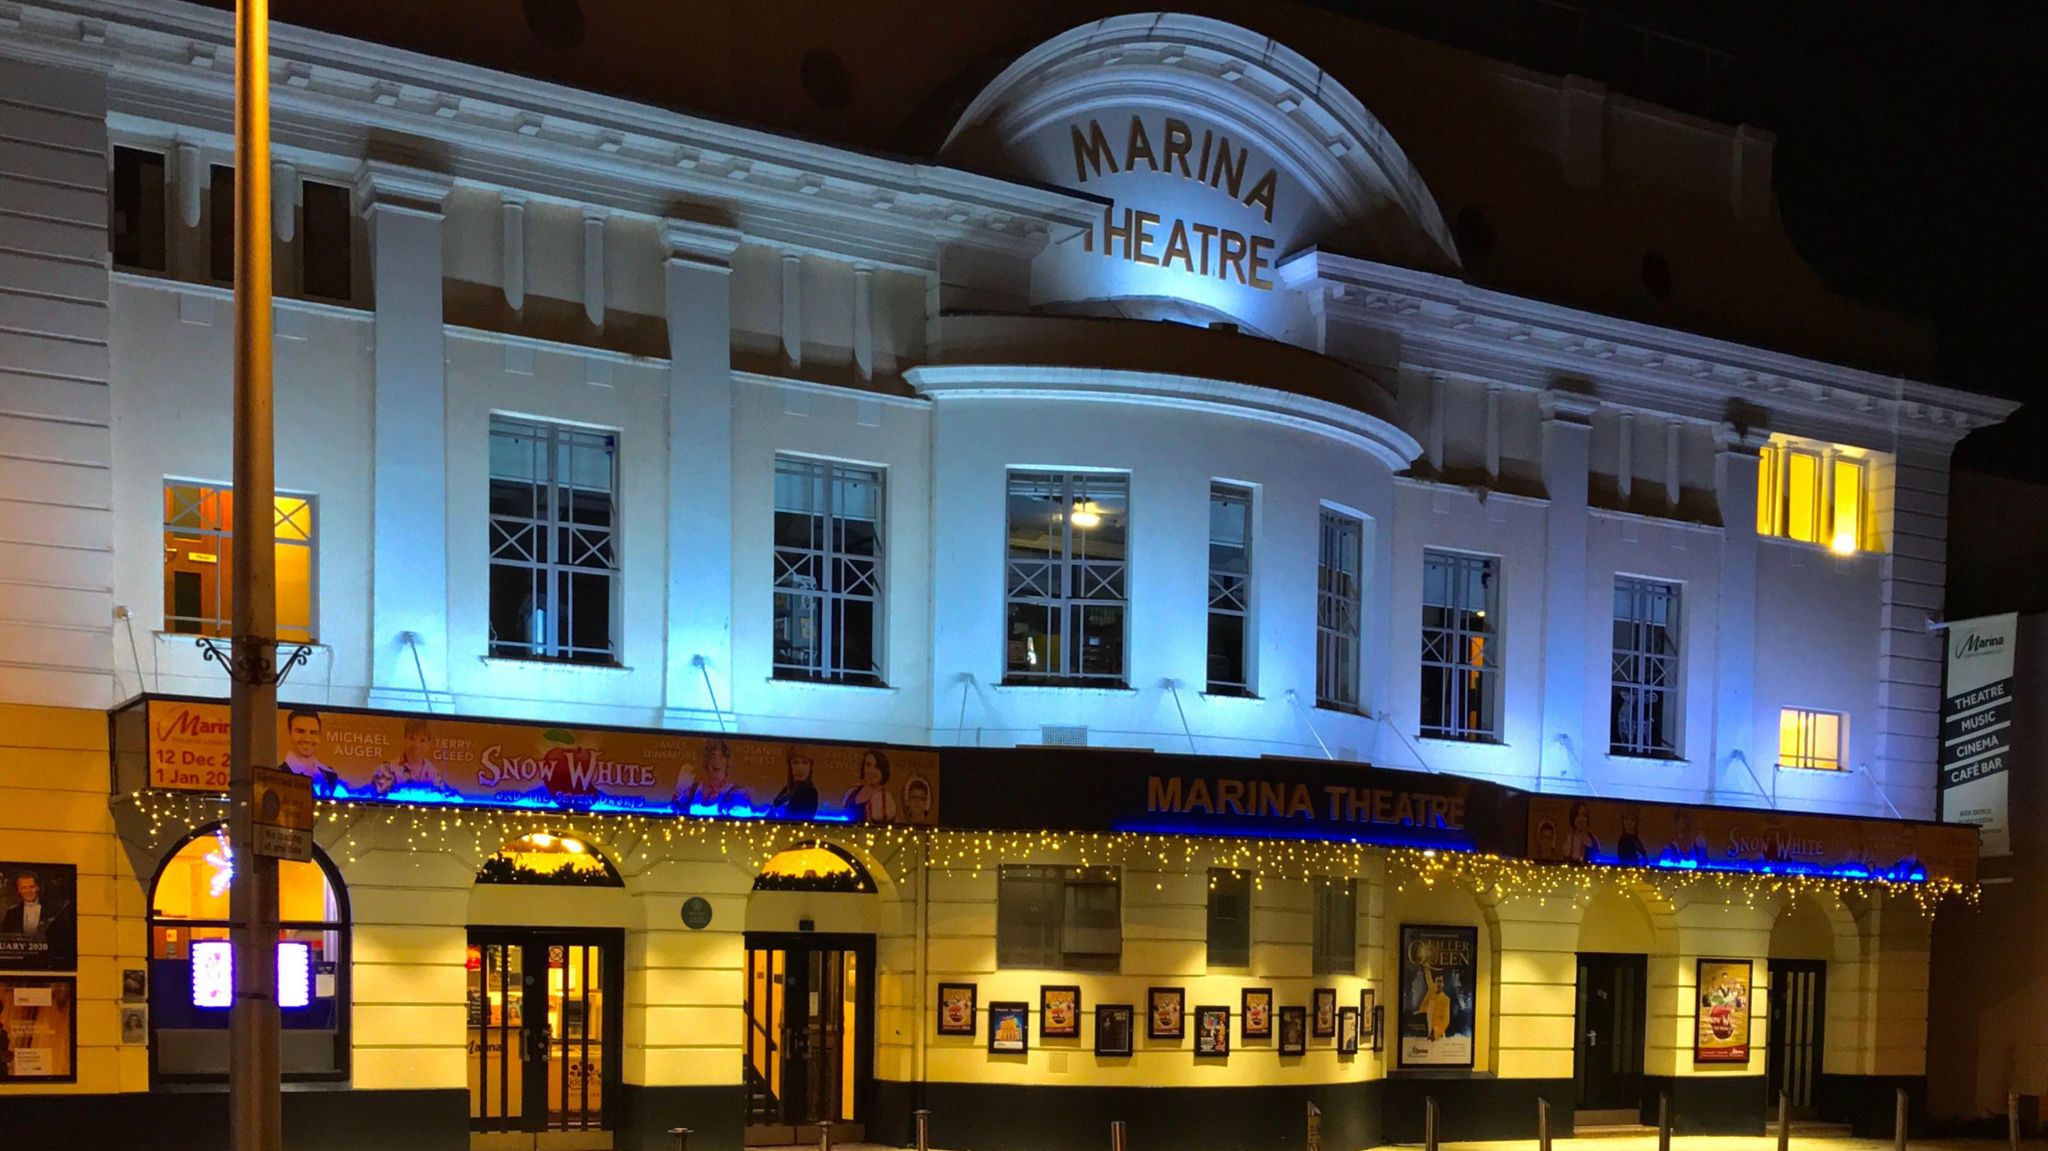 Facade of Marina Theatre lit up at night with light blue and yellow tones